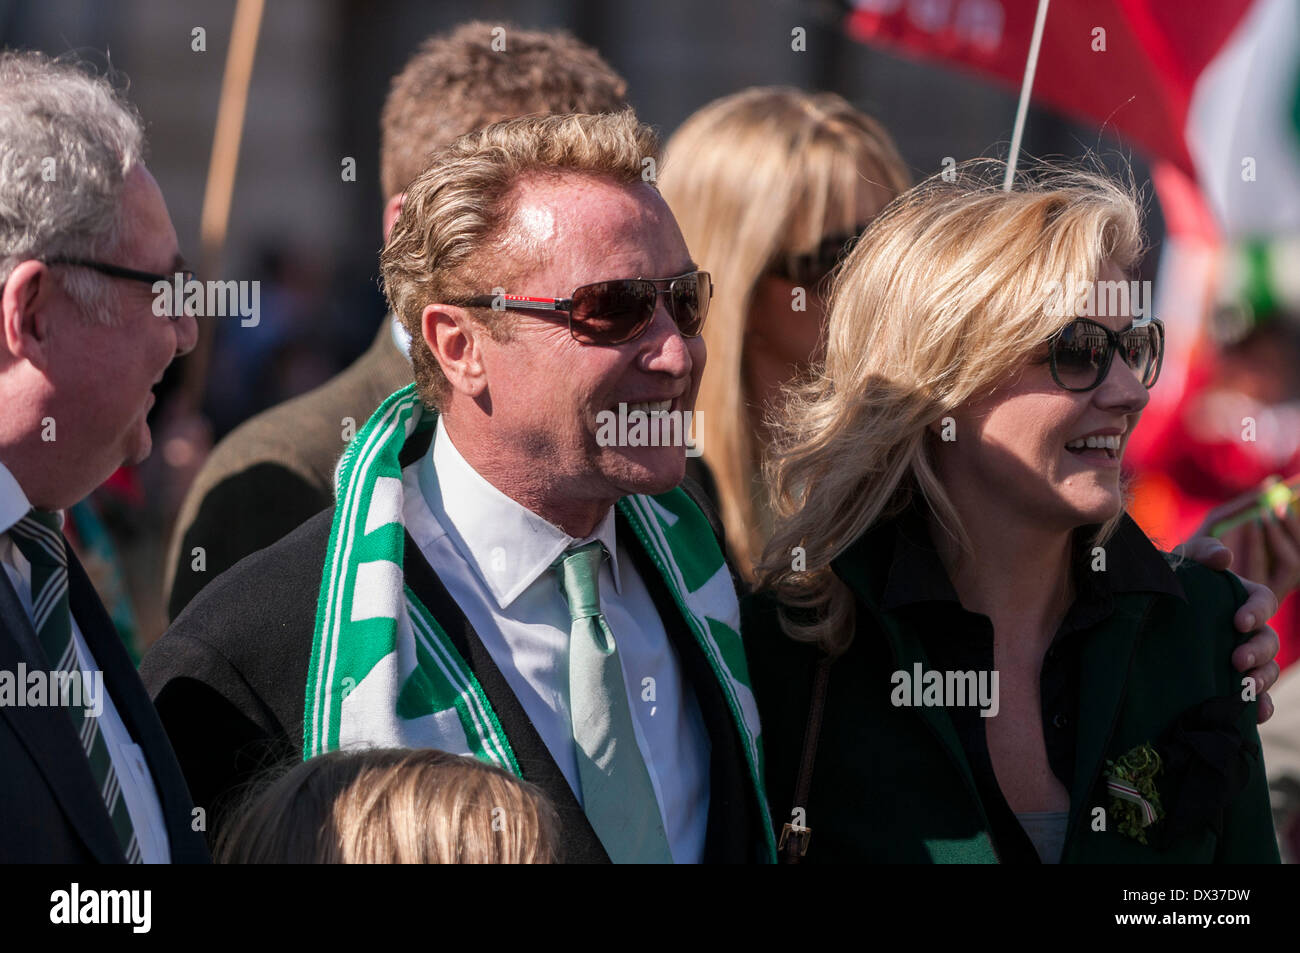 Waterloo Place, London, UK, 16 March 2014 - the annual St. Patrick's Day parade took place in bright sunshine in front of thousands of people who lined the route.  Michael Flatley and his wife, along with Irish dignitaries, were at the head of the parade. Credit:  Stephen Chung/Alamy Live News Stock Photo